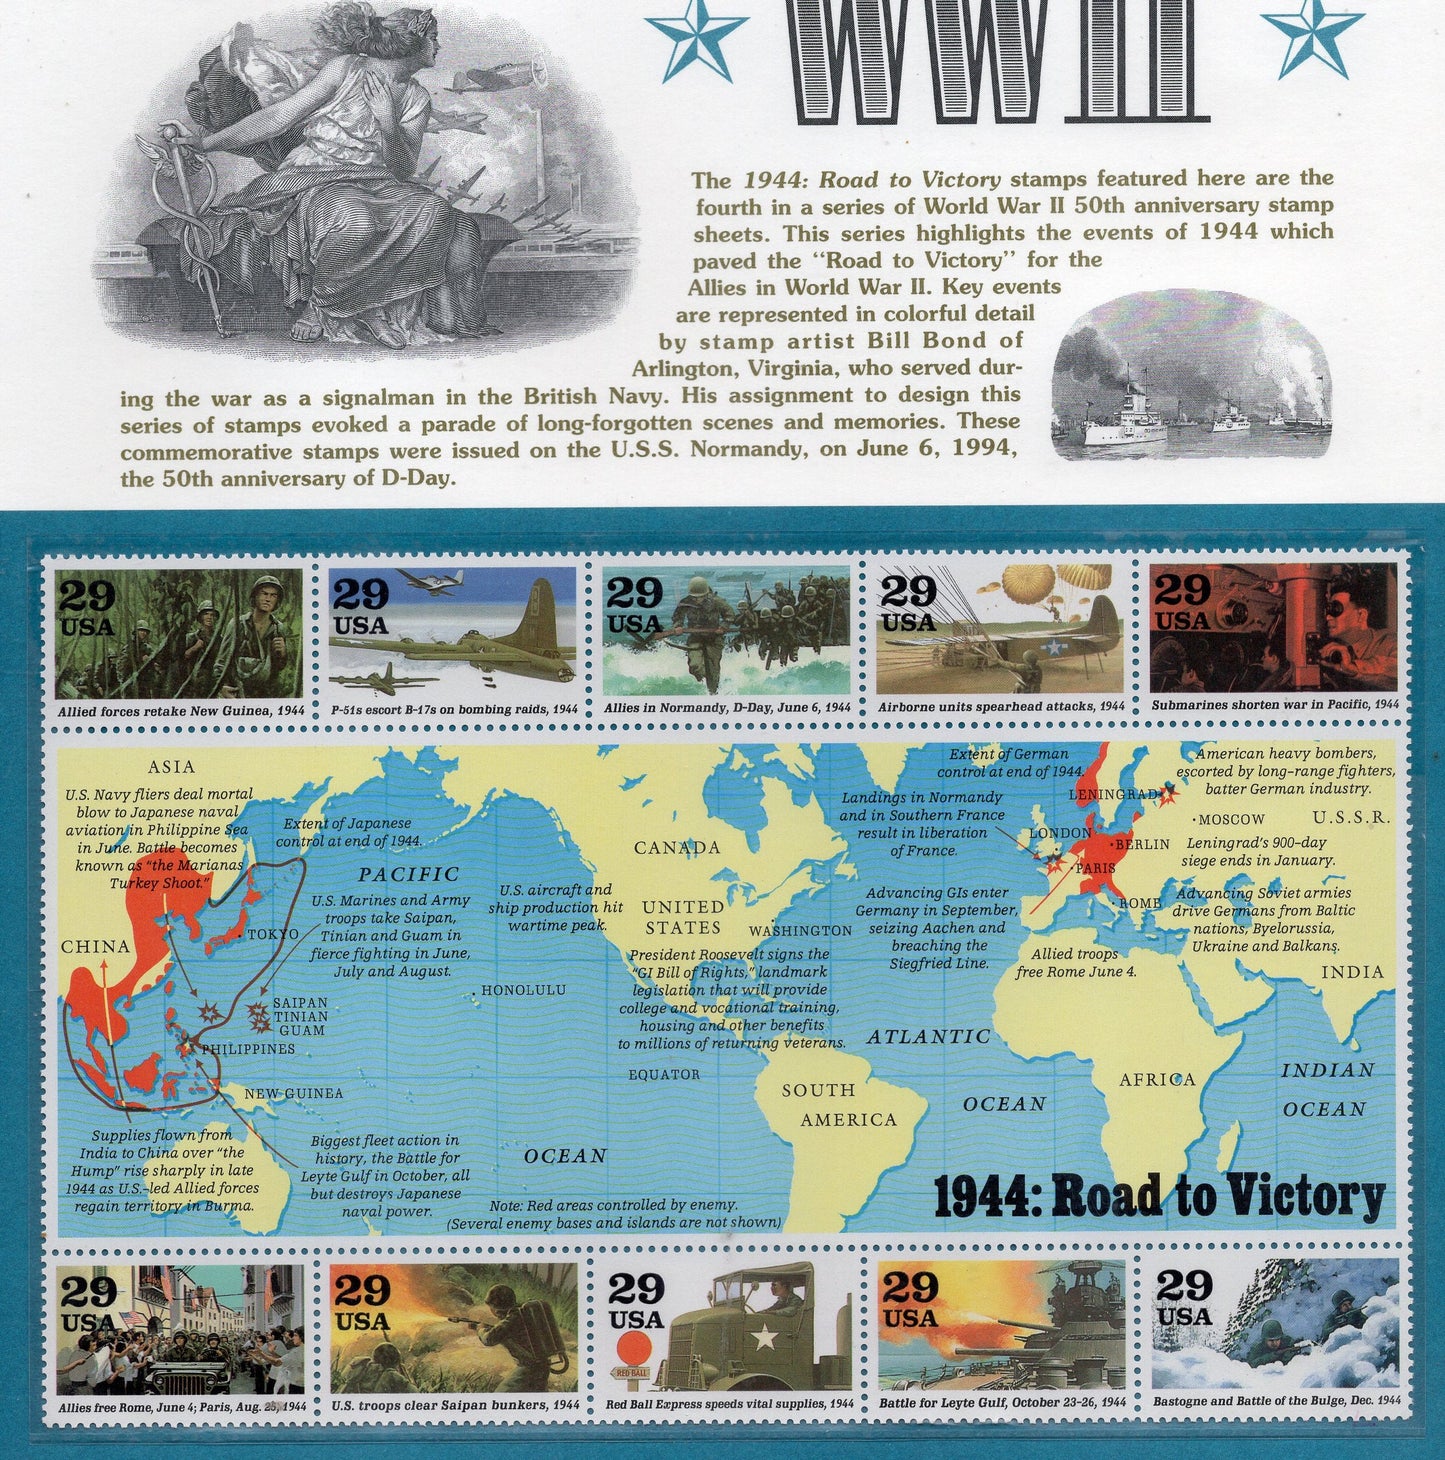 WORLD WAR 2 WWII 1944 Road to Victory Map Commemorative Panel with Sheet of 10 Stamps Illustrations plus Text – A Great Gift 8.5x11 -